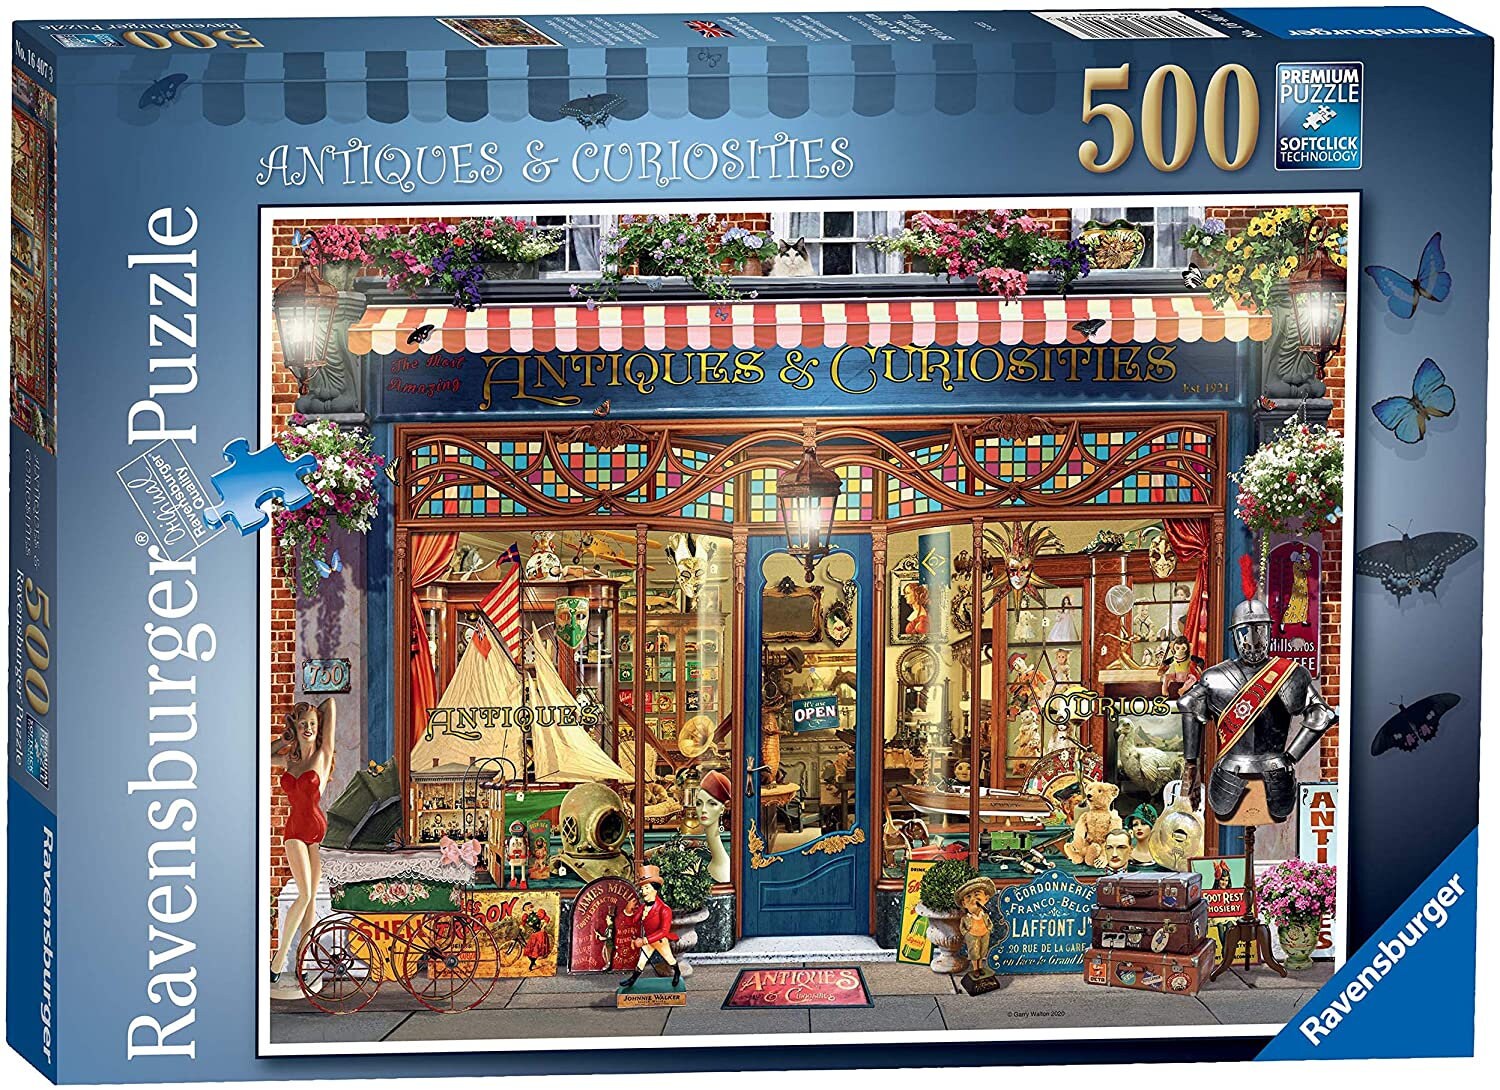 Ravensburger 500 Piece Jigsaw Puzzle Antiques & Curiosities  New & Sealed 